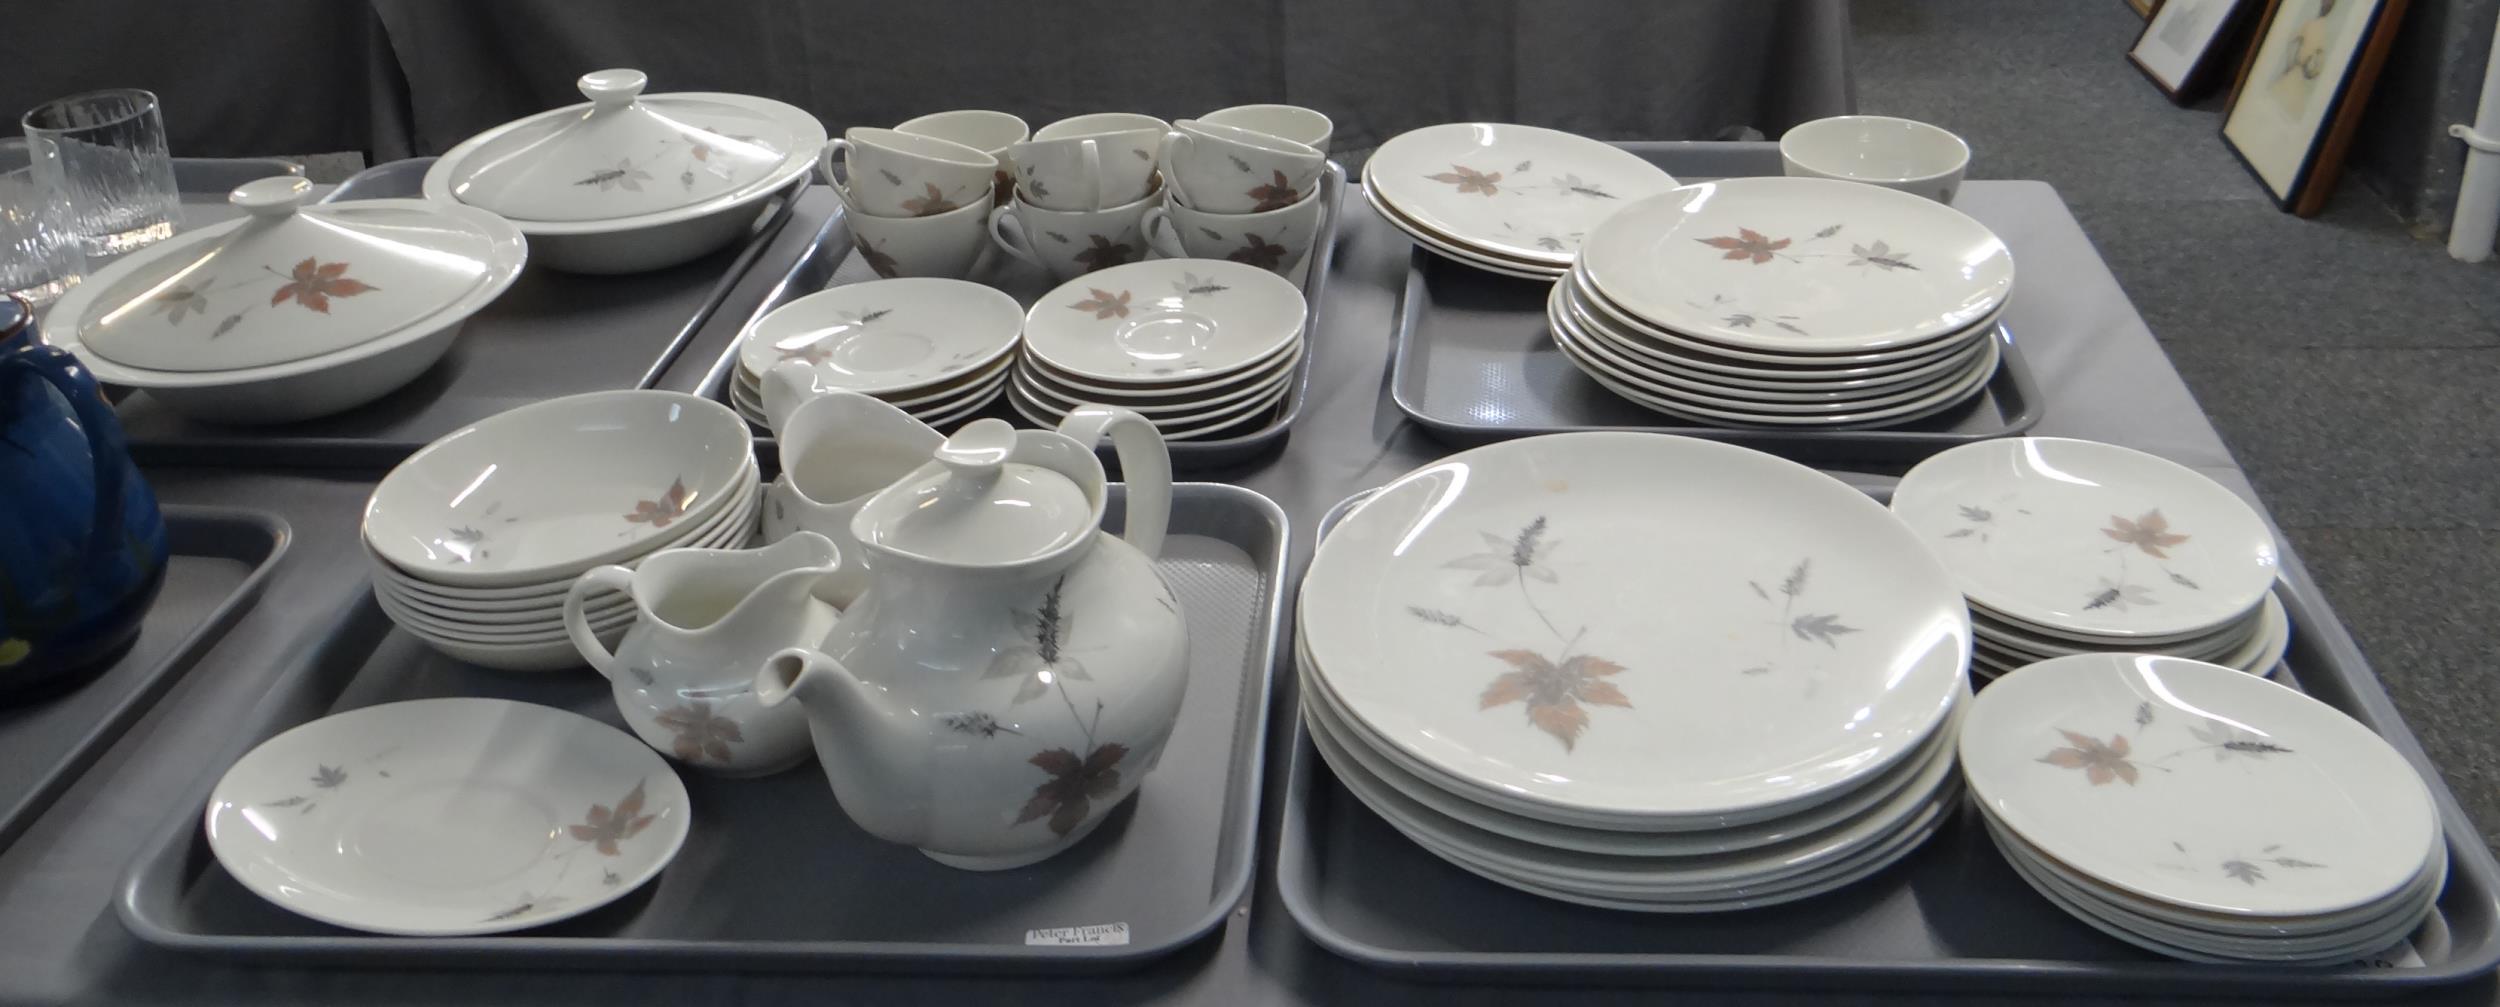 Five trays of Royal Doulton 'Tumbling Leaves' design items to include: lidded tureens, teacups and